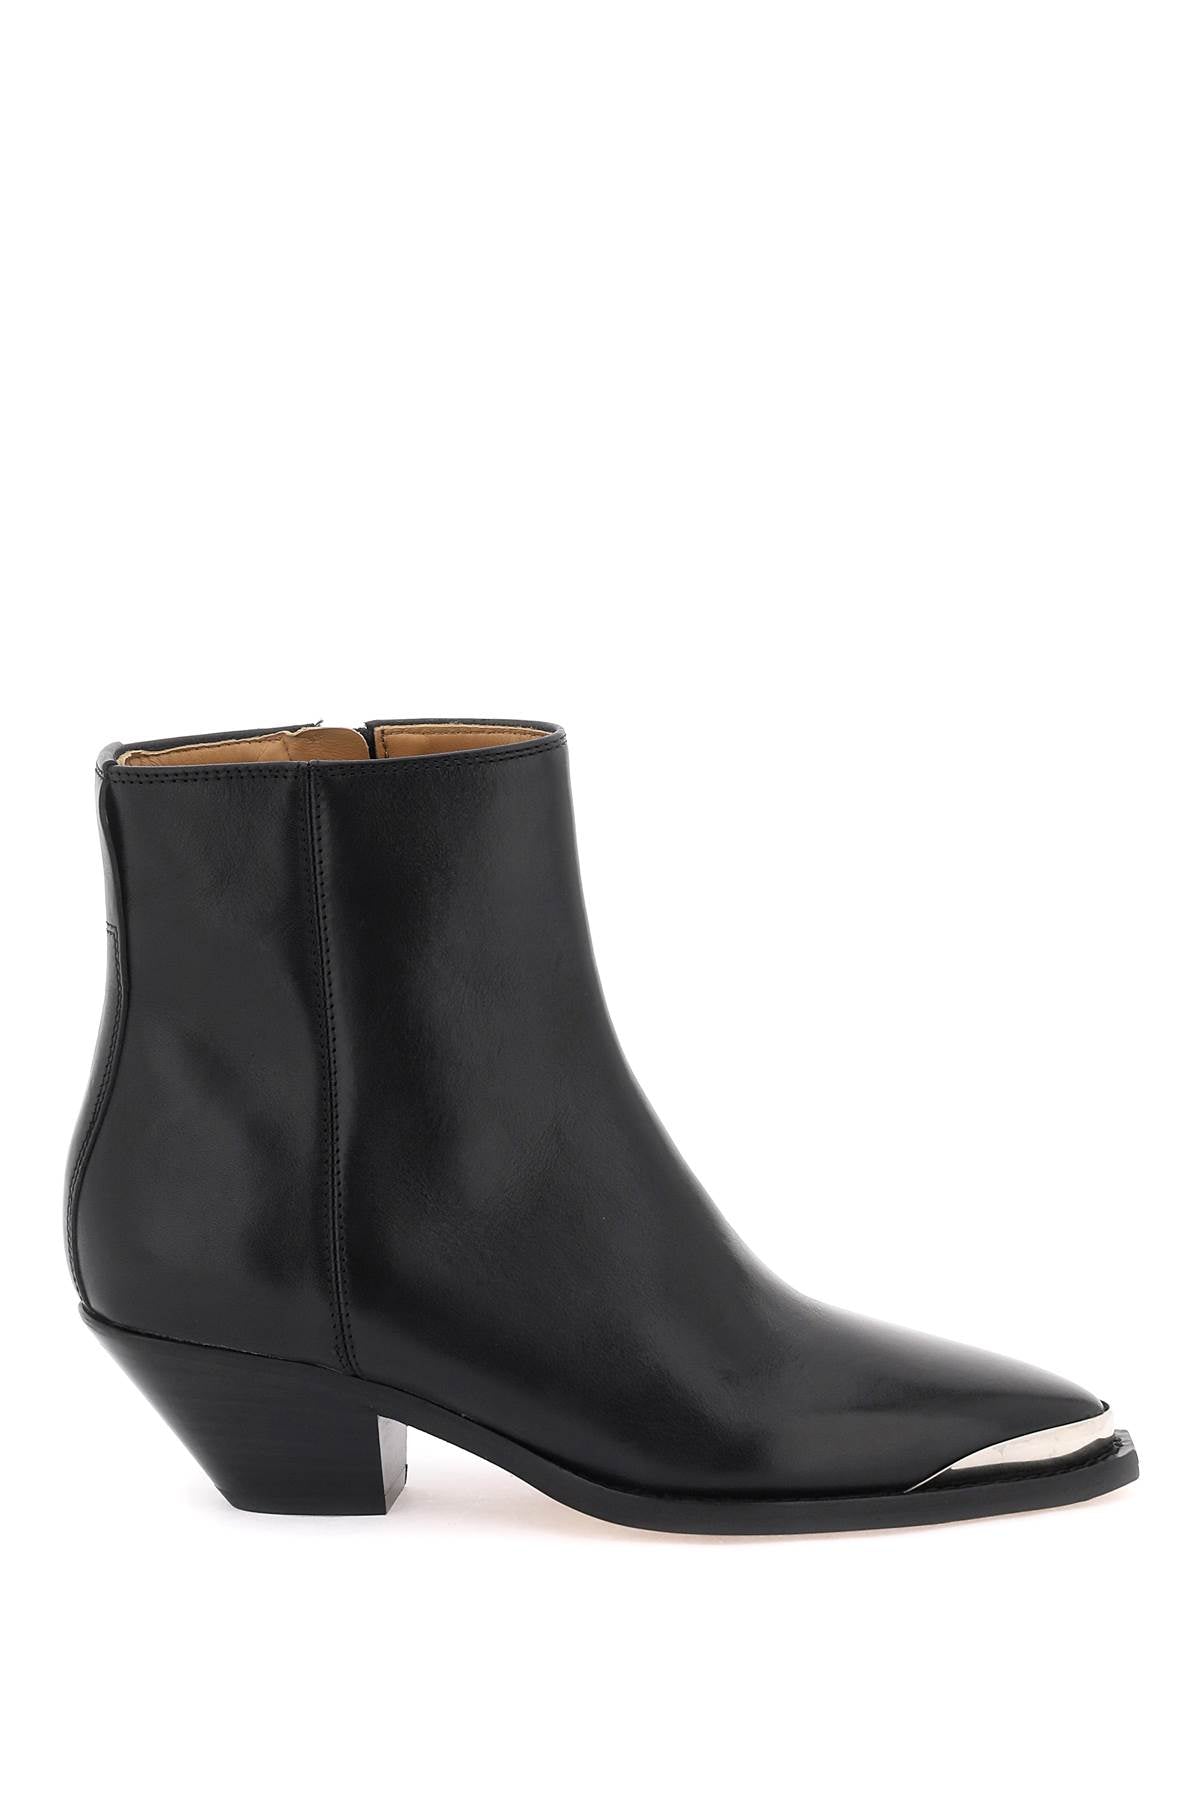 ISABEL MARANT Trendy Black Ankle Boots for Women - SS24 Collection